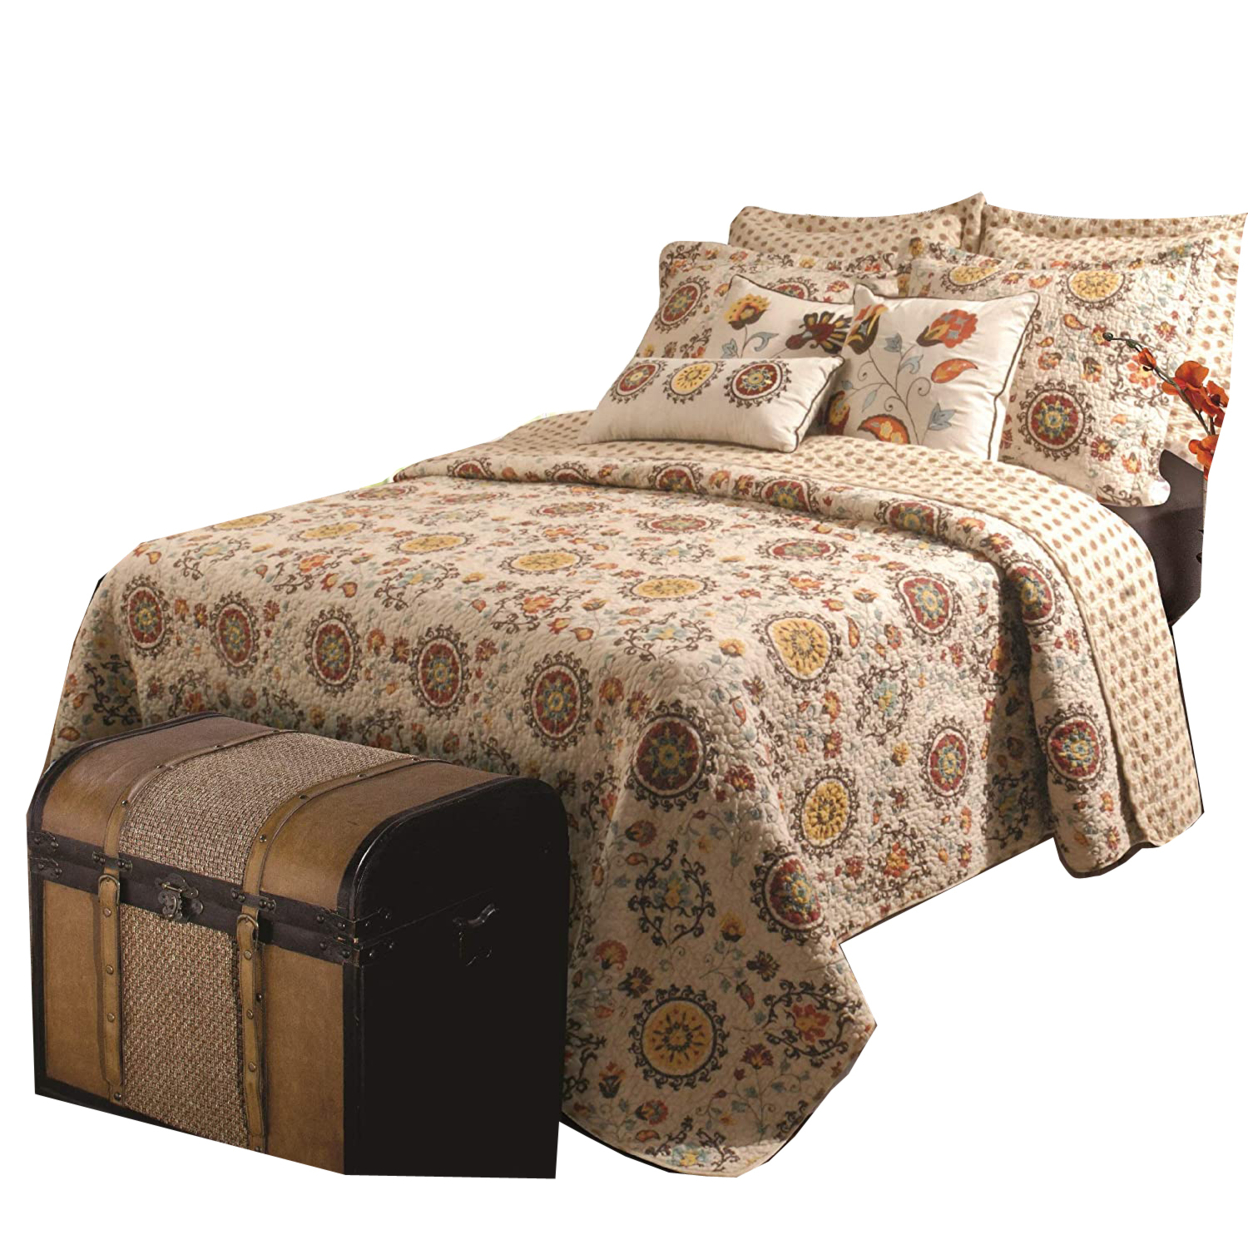 Elbe 5 Piece Queen Quilt Set With Medallion And Floral Pattern, Beige And Brown- Saltoro Sherpi